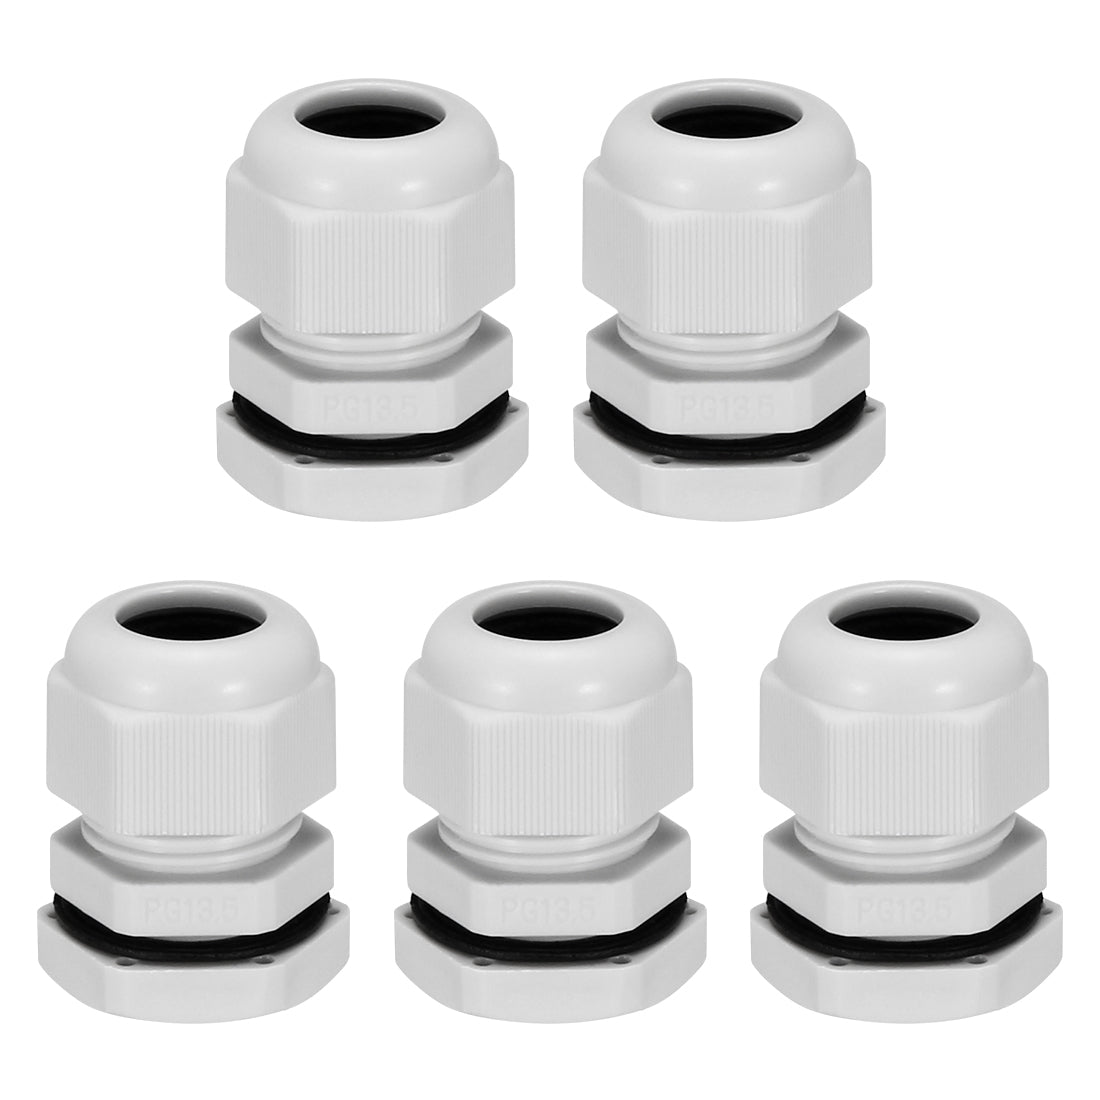 uxcell Uxcell 5Pcs PG13.5 Cable Gland Waterproof Plastic Joint Adjustable Locknut White for 6mm-11mm Dia Cable Wire